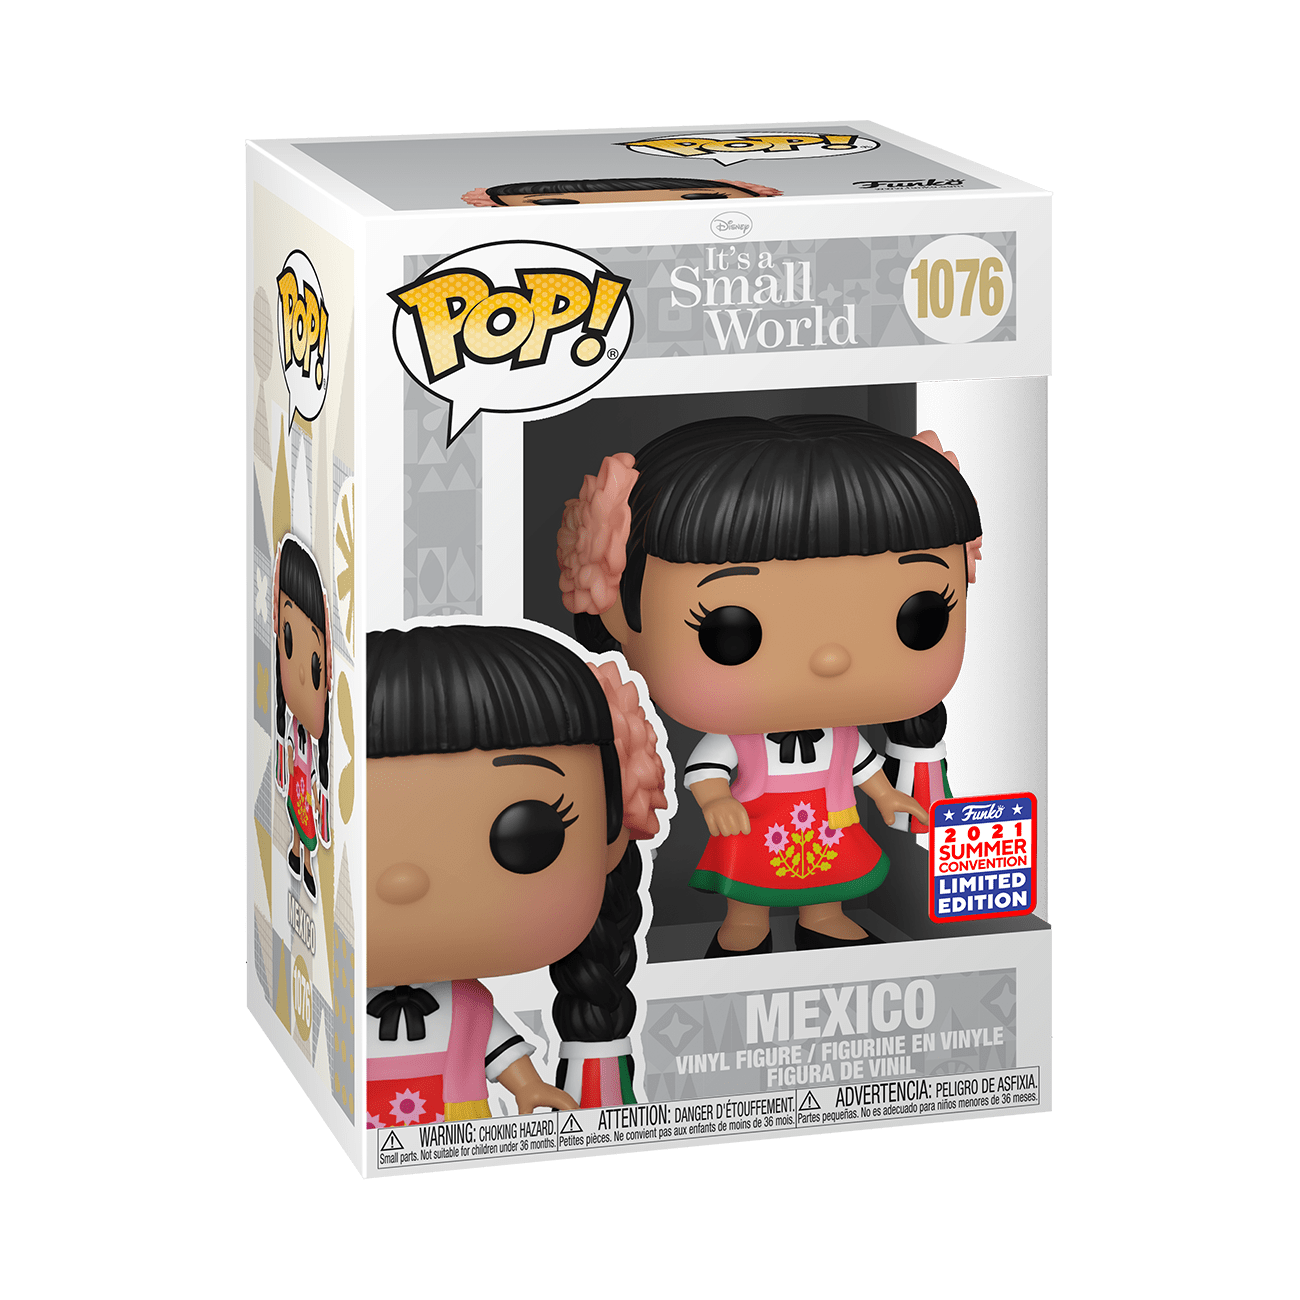 Disney: It's a Small World: Mexico (2021 SDCC Shared Exclusive)